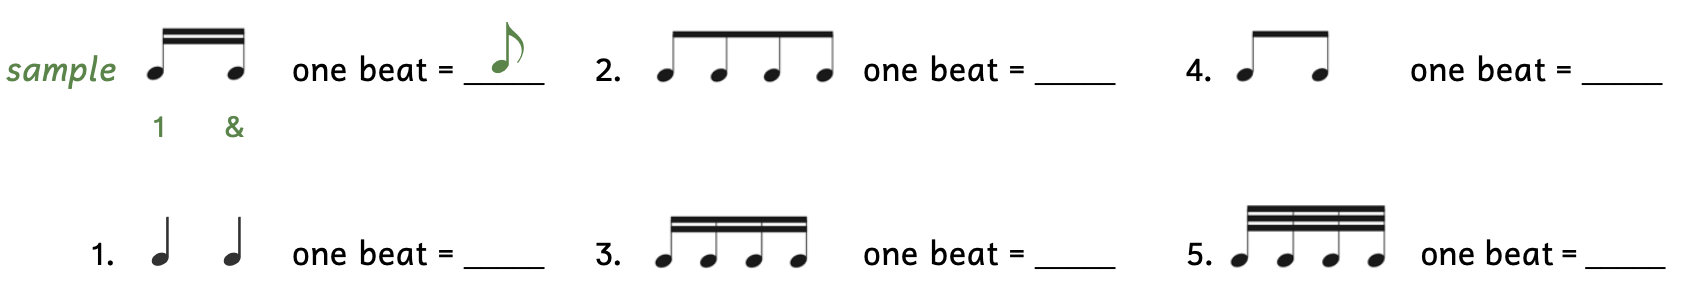 Exercises asking how many beats each group is worth. The sample shows two sixteenth notes. This would be the division, so the beat would be an eighth note. The rhythm syllables would be "1, and." Number 1 shows two quarter notes. Number 2 shows 4 eighth notes. Number 3 shows 4 sixteenth notes. Number 4 shows 2 eighth notes. Number 5 shows 4 thirty-second notes.